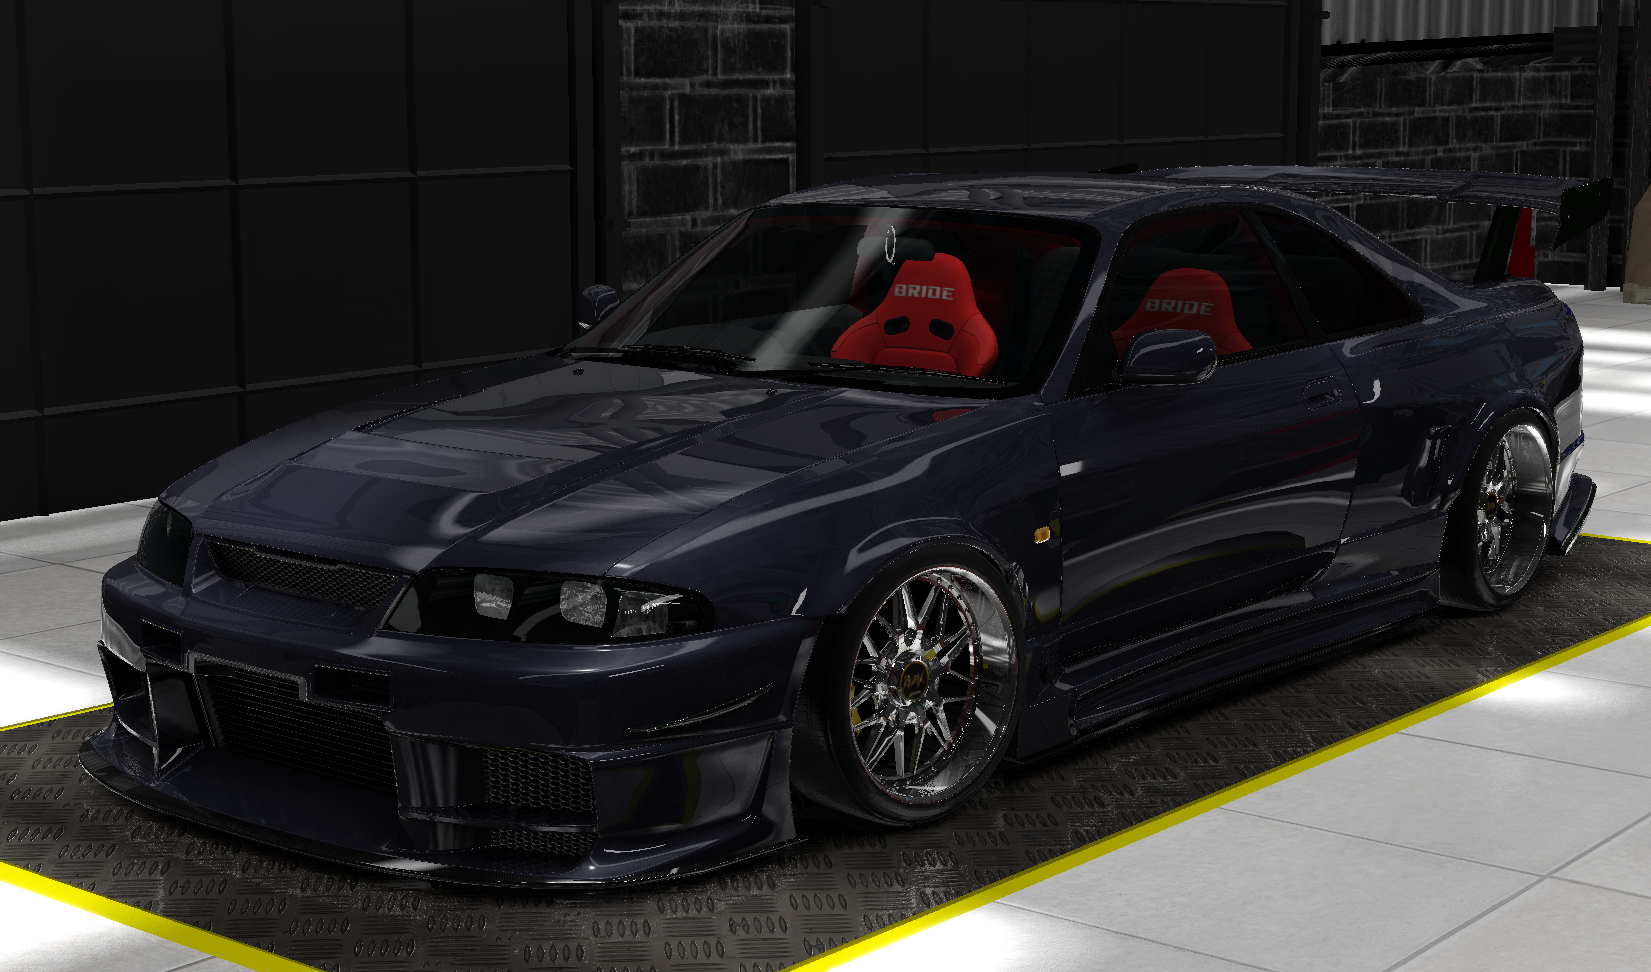 Nissan R33 Drift Preview Image